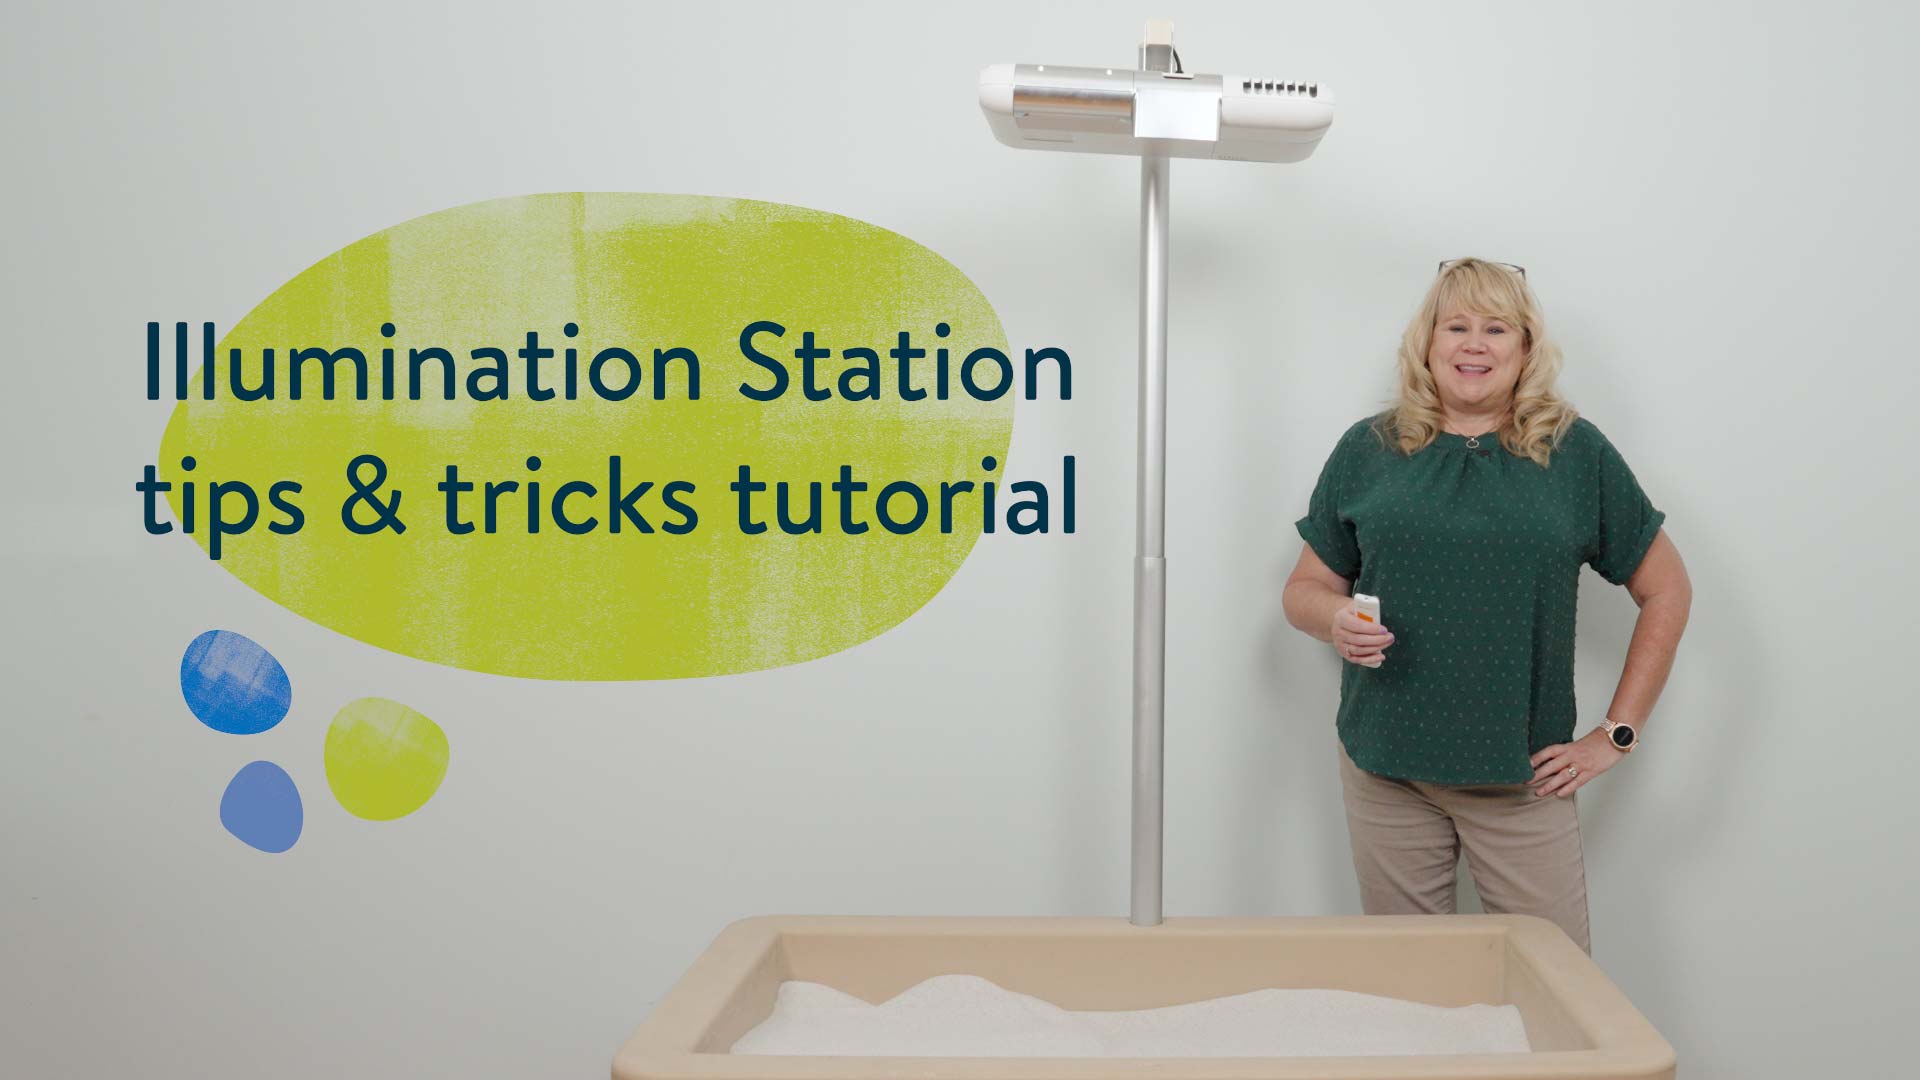 Video: How to Operate the Illumination Station